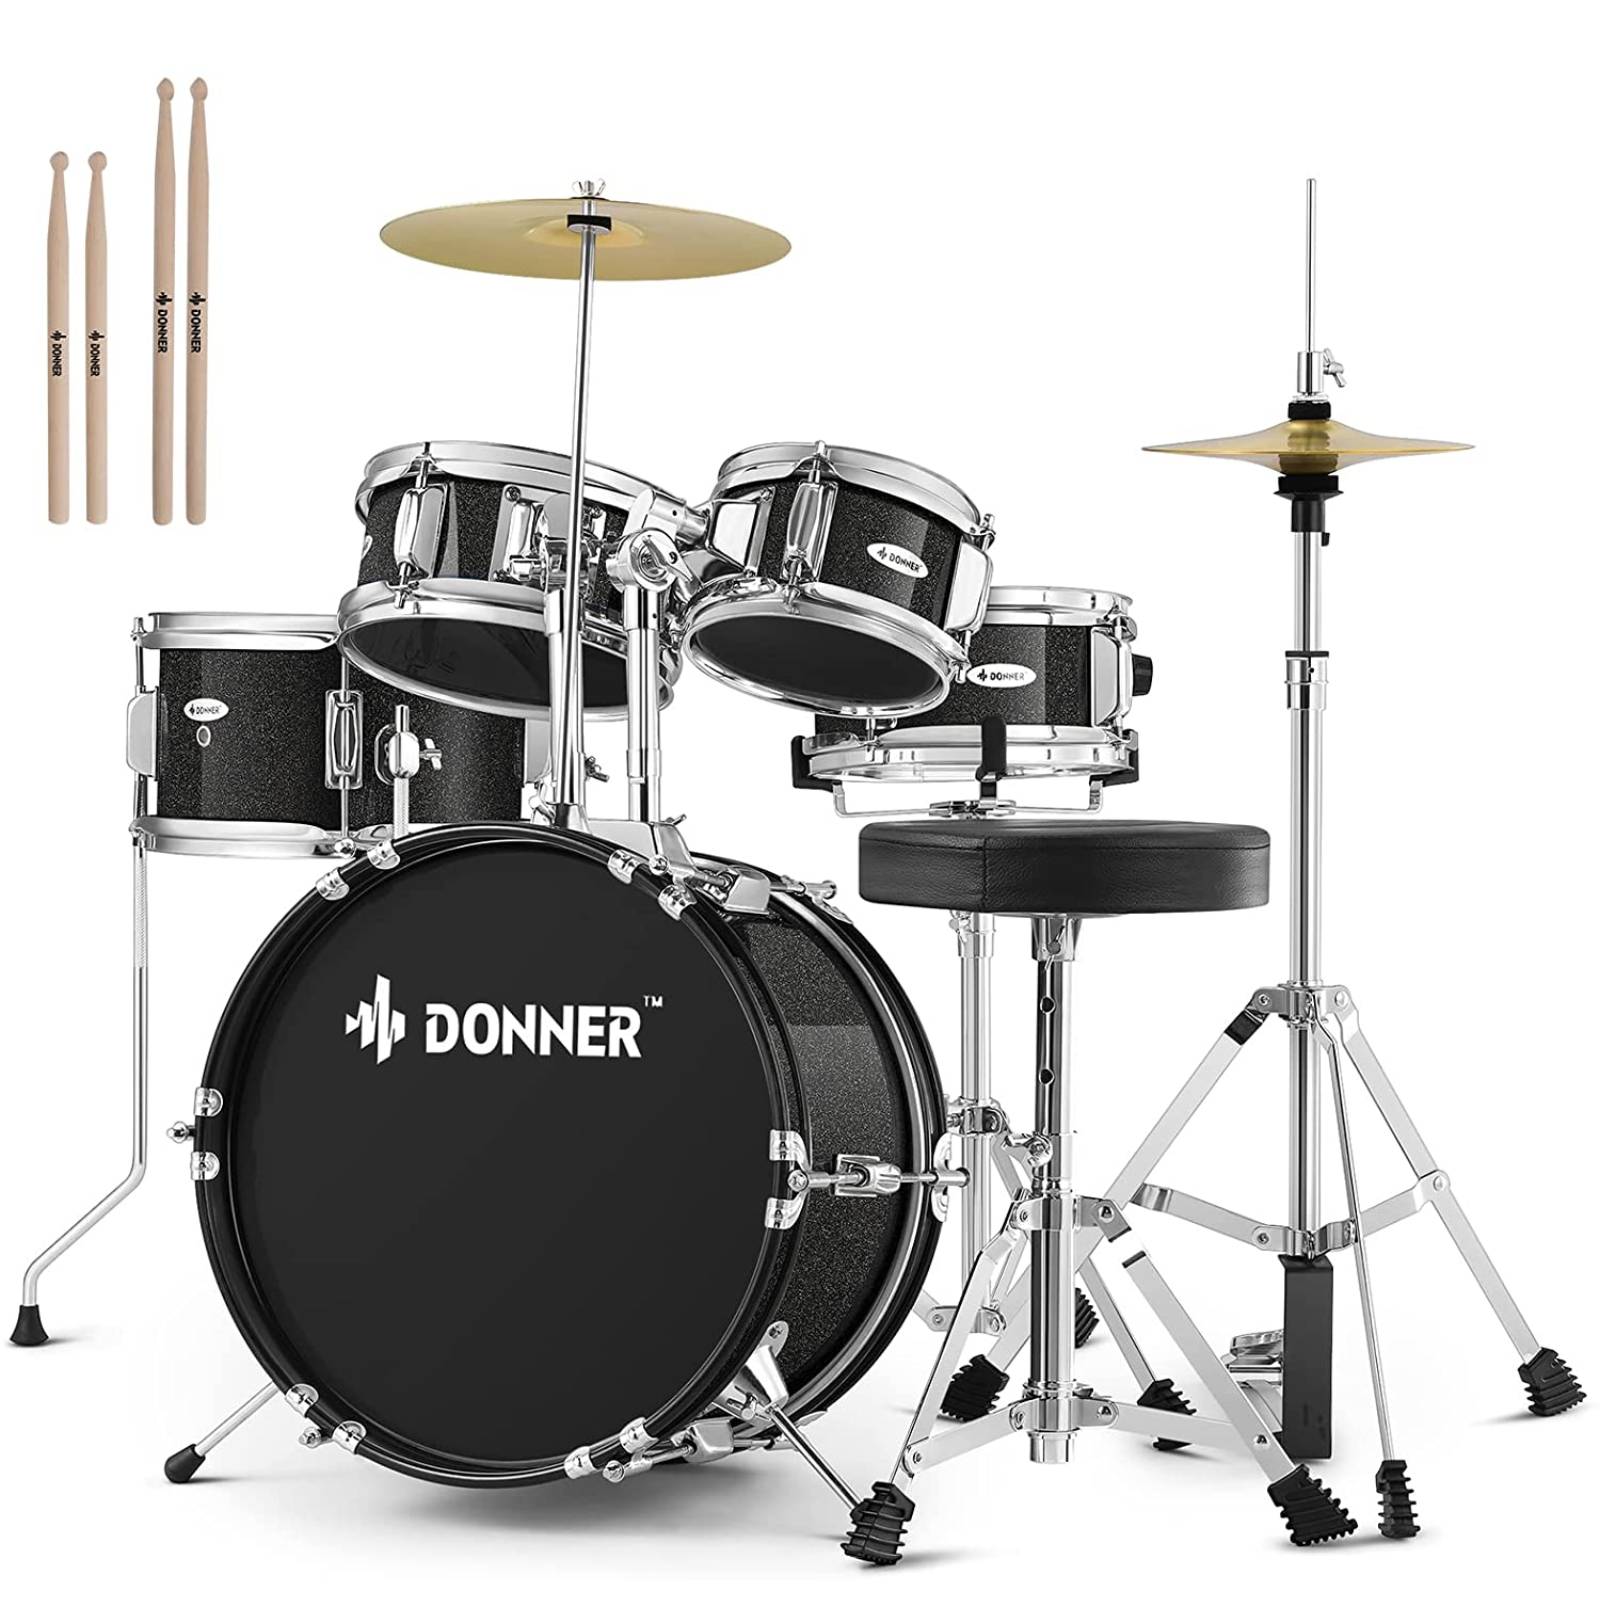 

Donner 14 inch 5-Piece Acoustic Complete Drum Set For Junior/Student with Adjustable Throne Cymbal Pedal Kit